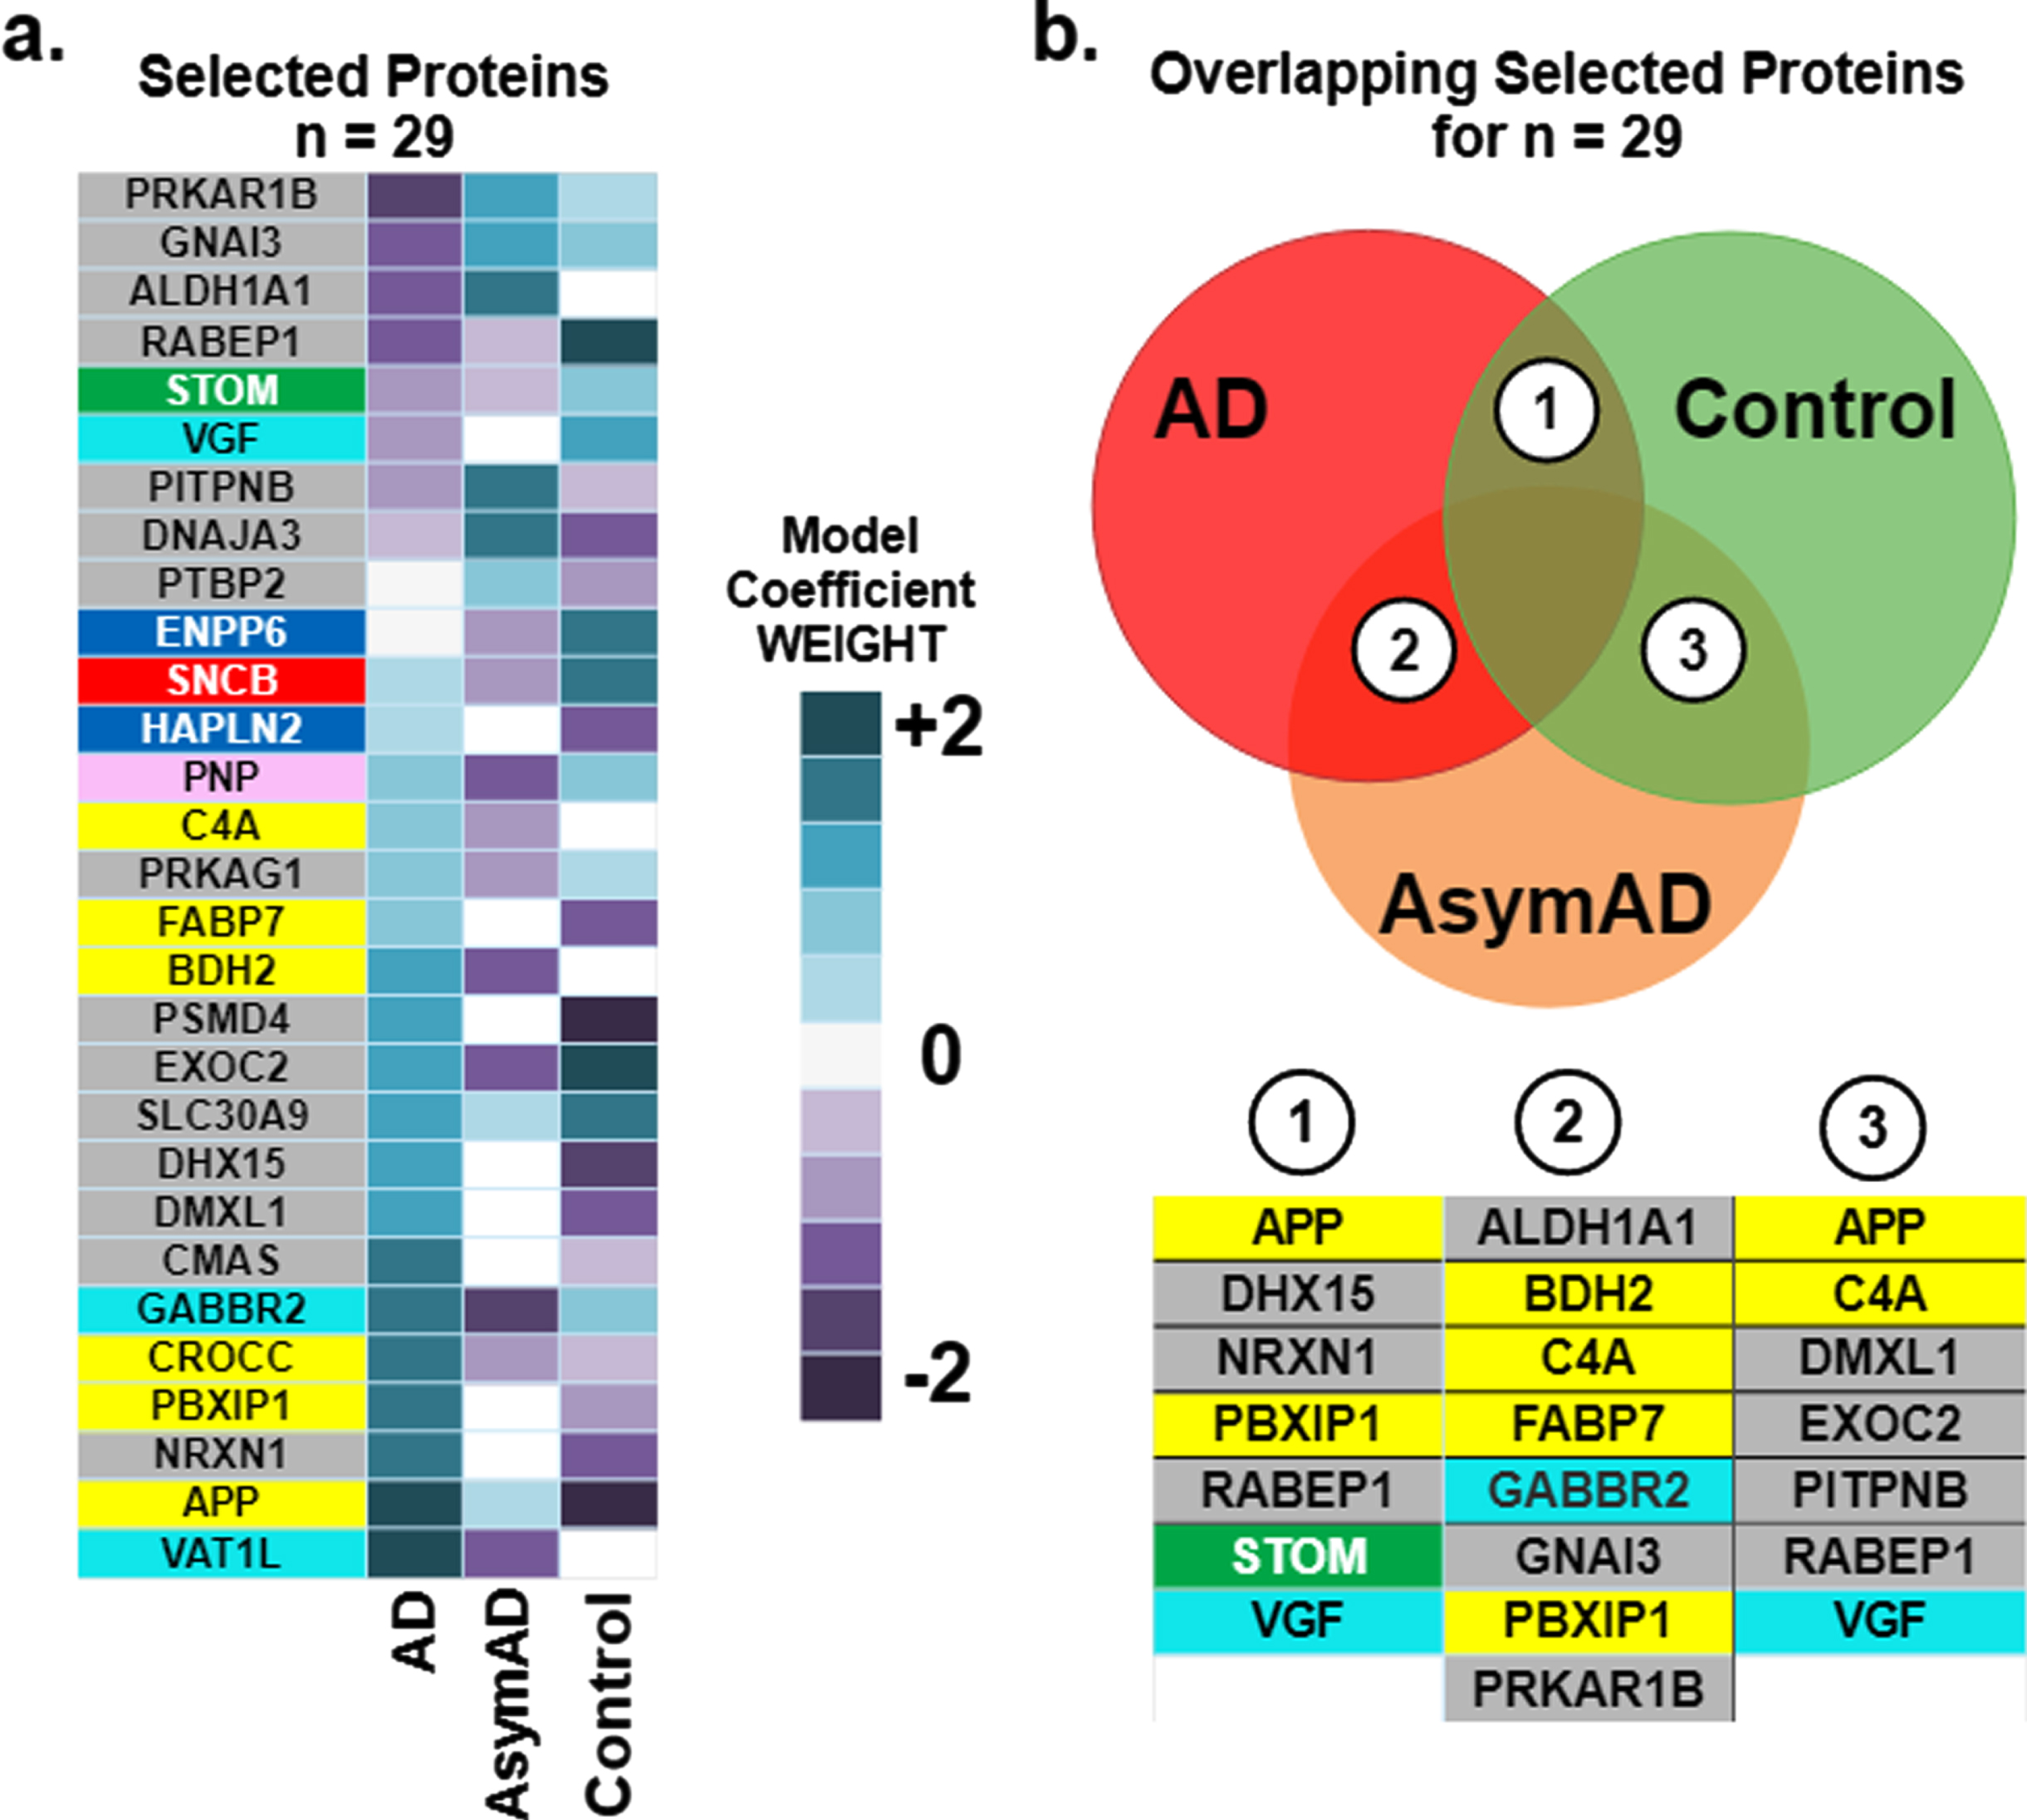 Driving effects of the selected 29 proteins on the prediction of diagnostic classes of Alzheimer’s (AD), asymptomatic Alzheimer’s (AsymAD), and Control. Note the color of the box around individual listed proteins corresponds to functional modules derived in Johnson et al. [3] and detailed later in Fig. 6. a) The heatmap illustrates the relative magnitude that each protein drives diagnostic class. Driving effects are determined from the coefficients of the SVM. Since the one-versus-rest approach for multi-class classification is used, results encompass three coefficients for each selected protein, one coefficient corresponding to each diagnostic class (AD, AsymAD, Control). b) Key proteins that drive correct prediction in multiple or overlapping classes. The Venn diagram illustrates the overlap in classes: area 1 denotes overlap between AD and Control, area 2 overlap between AD and AsymAD and area 3 between AsymAD and Control. The biomarker panels for each overlap area denote individual predictive proteins shared by overlapping classes.